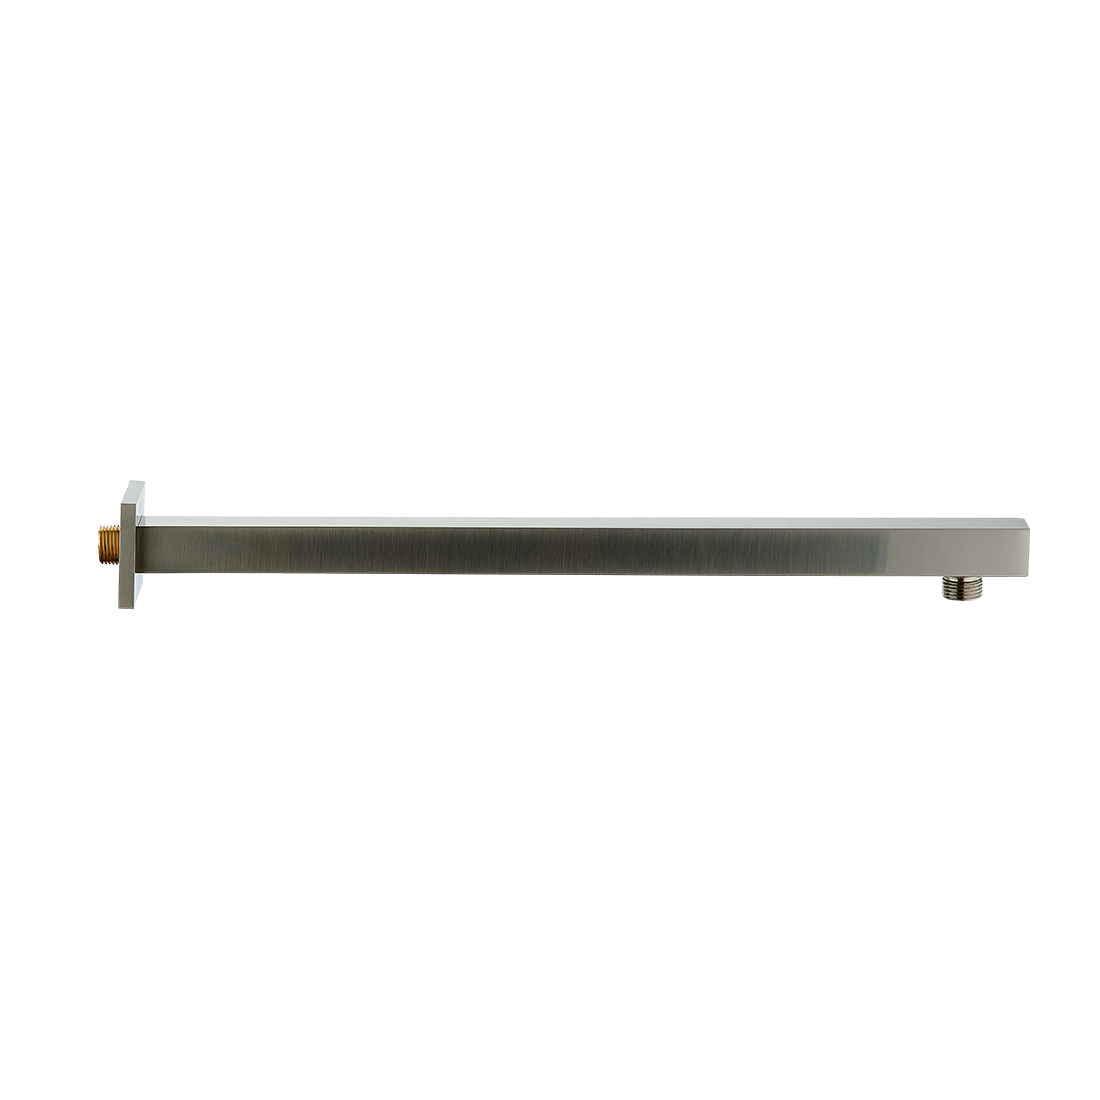 Dax Brass Square Shower Arm 12 Inches Brushed Nickel Finish (DAX-1011-325-BN)